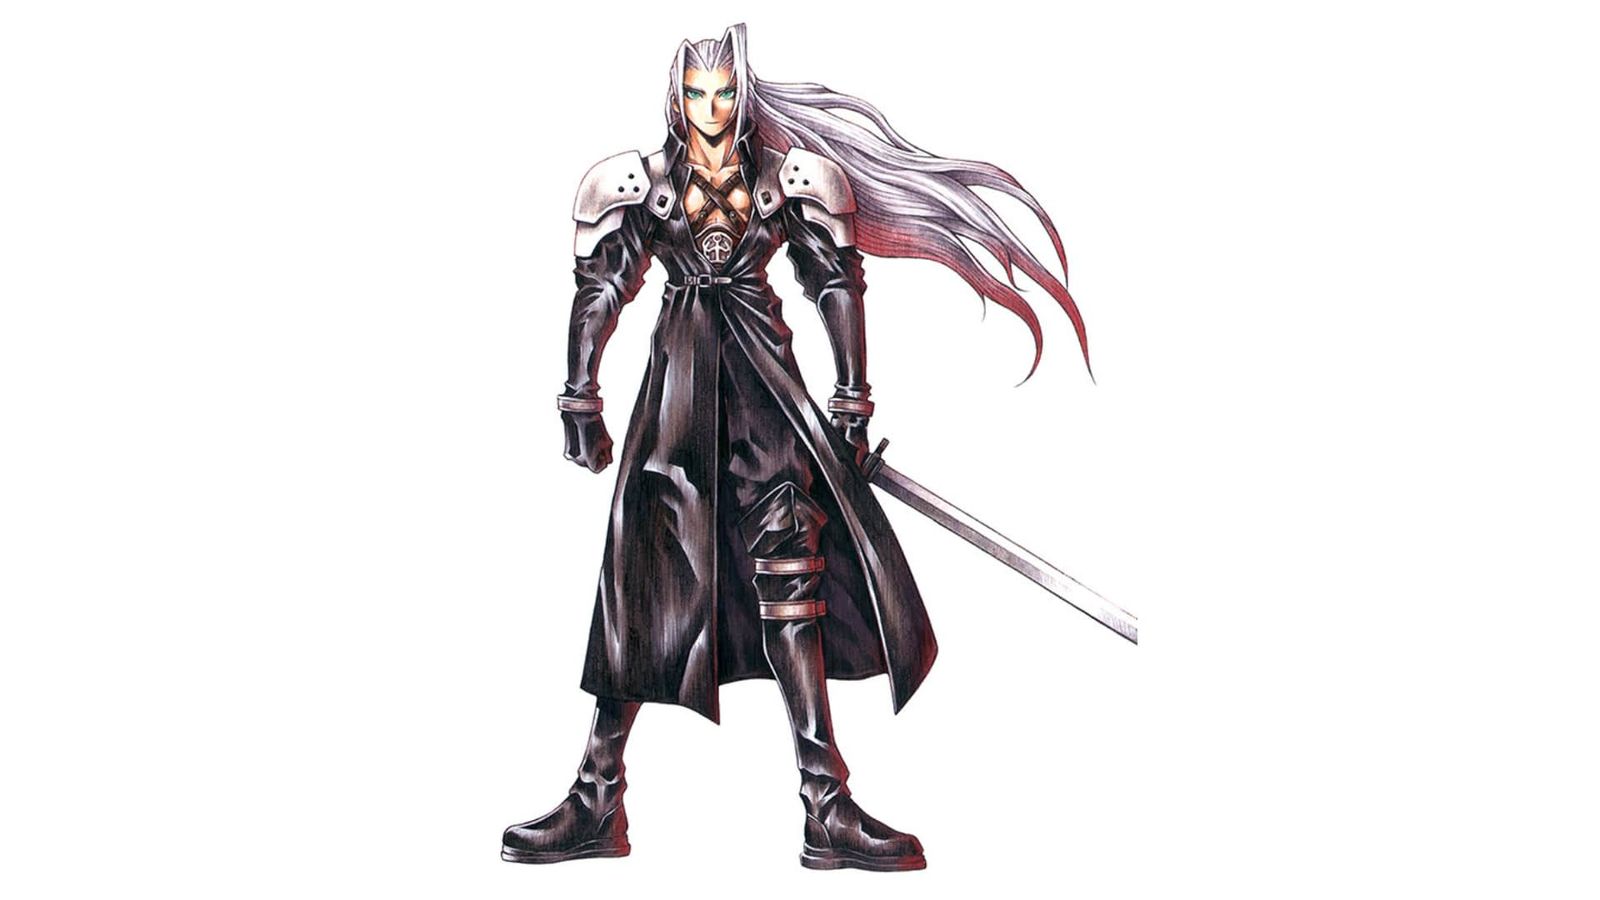 An image of Sephiroth from FF VII